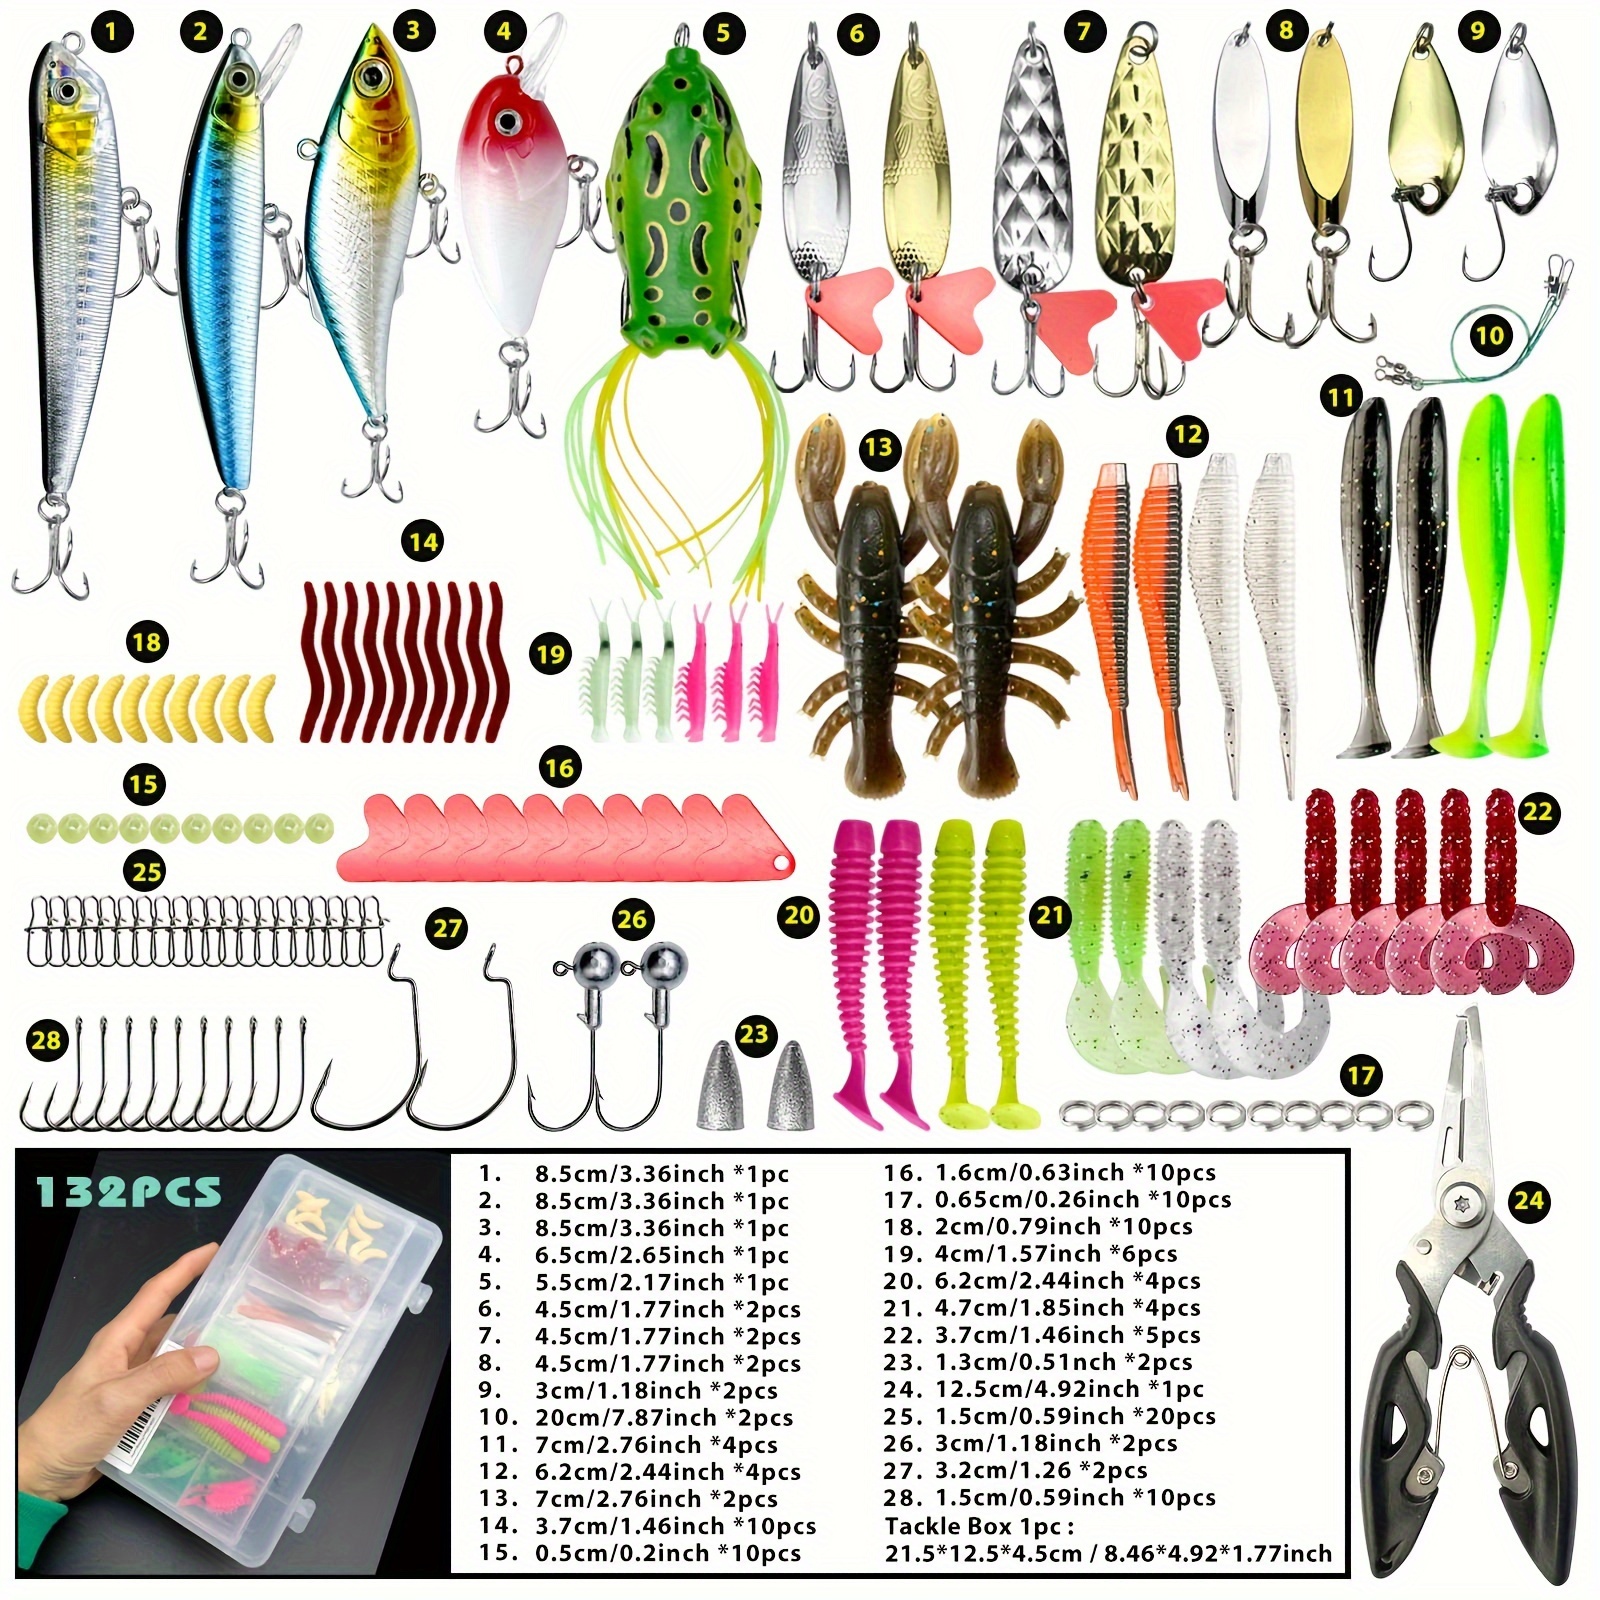 26 107 132 284pcs fishing lures kit tackle box with hard lures spoon lures soft plastic worms swimbaits crankbait jigs hooks for bass trout salmon fishing details 4